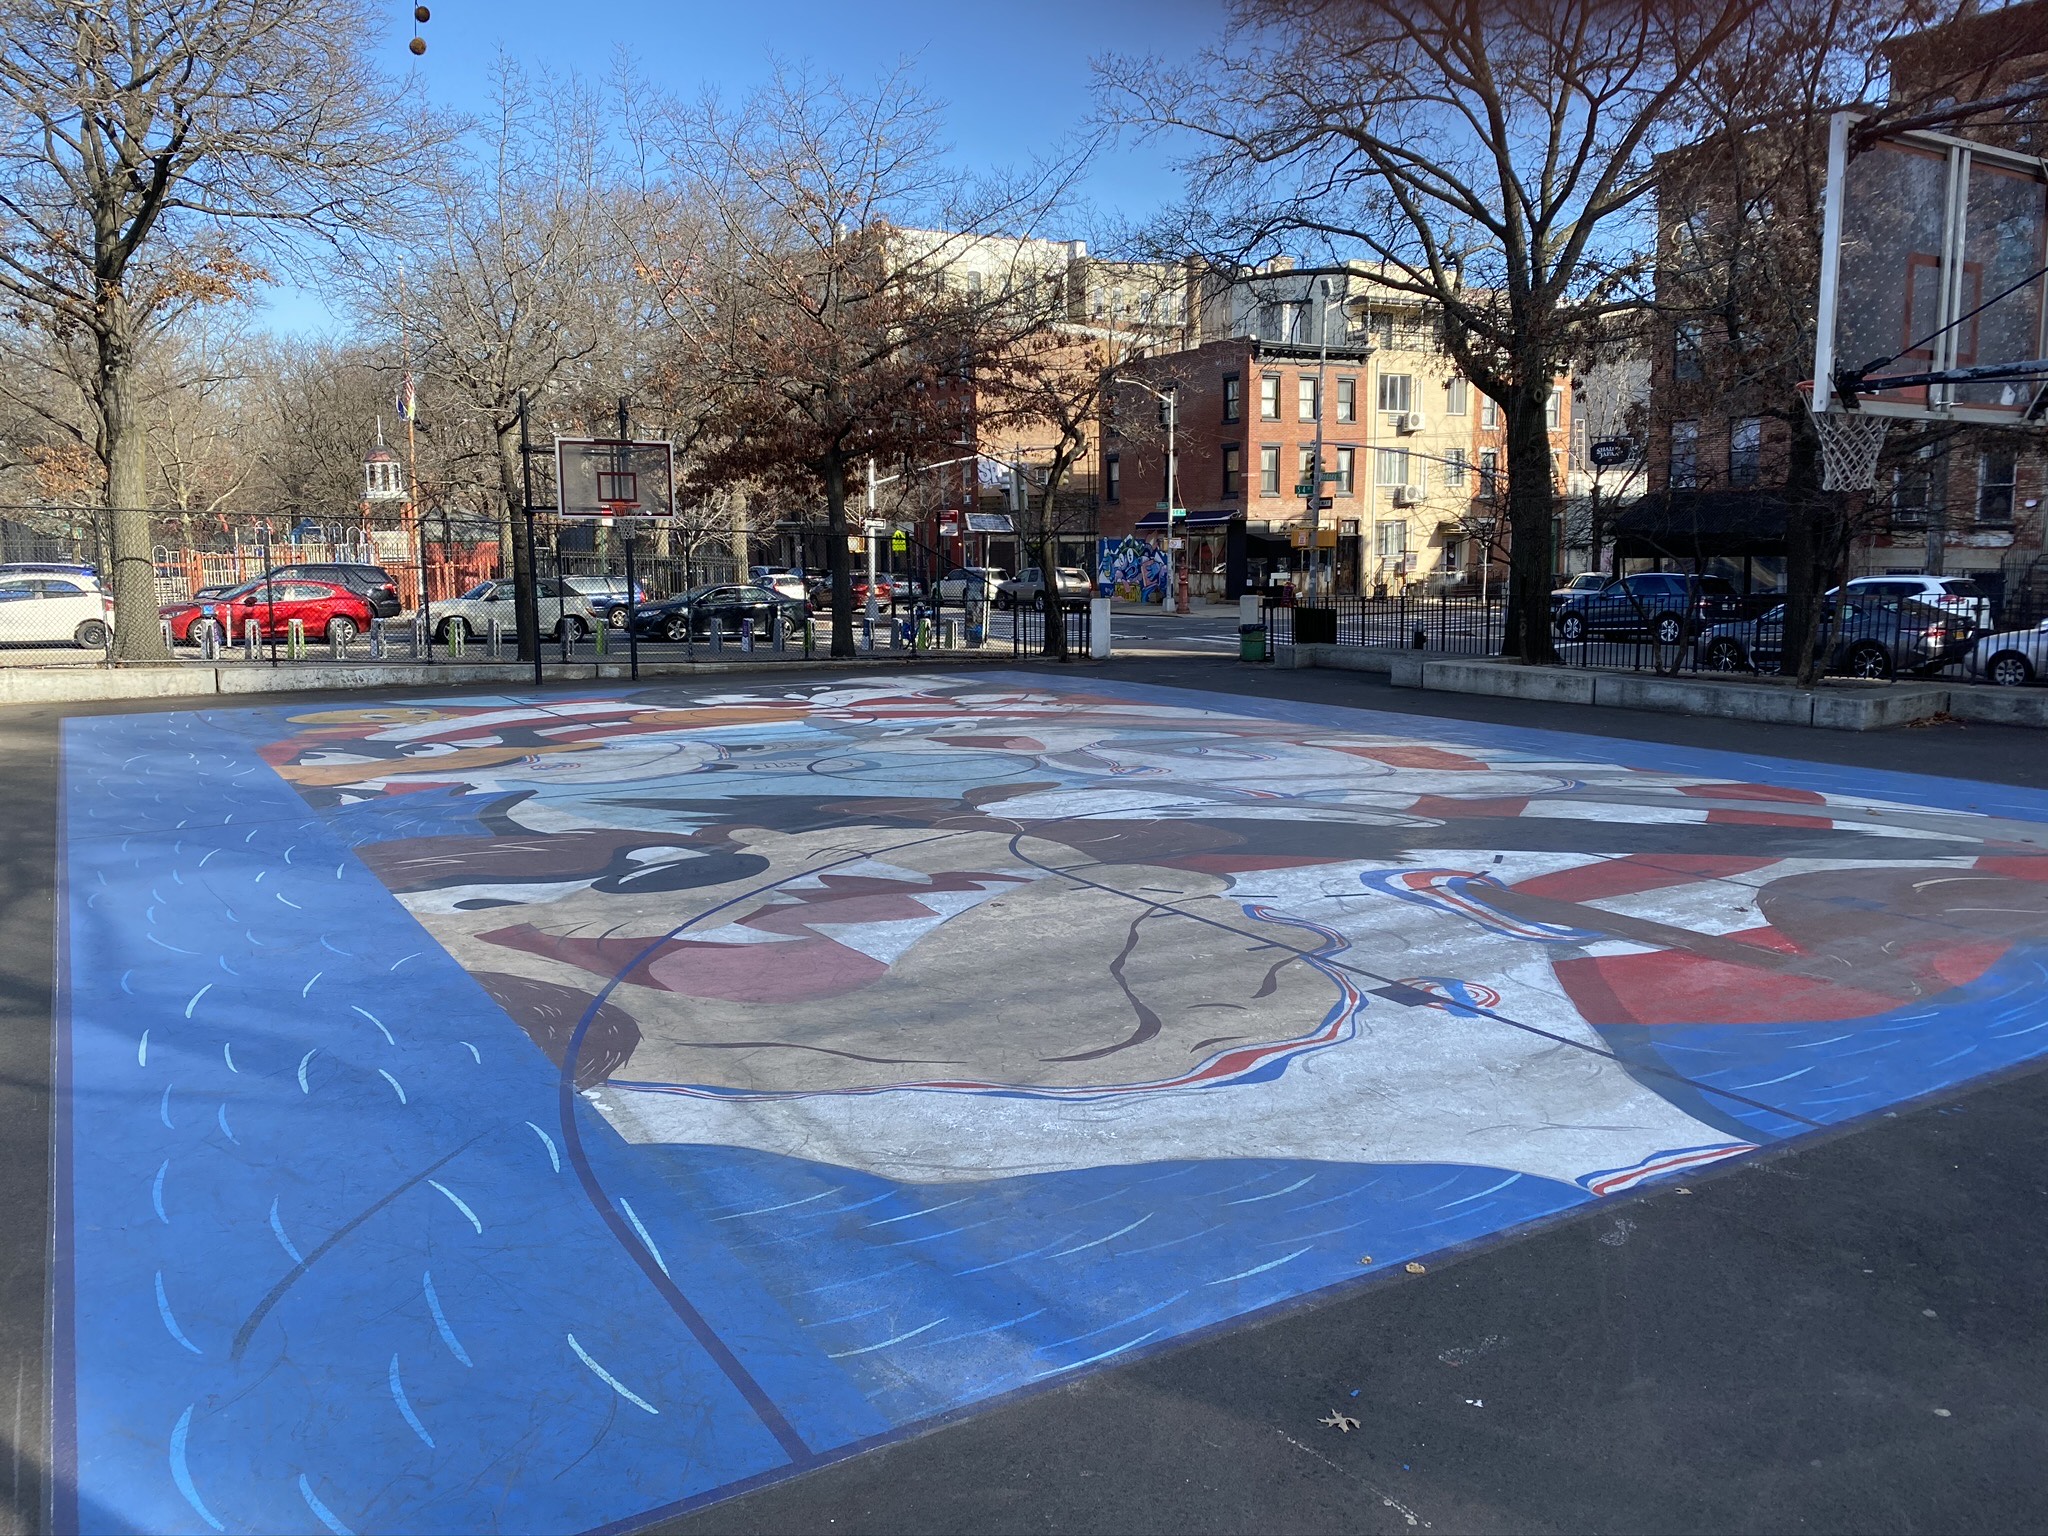 Space Jam “Tune Squad” Court Opens in Brooklyn – What Lara Wrote